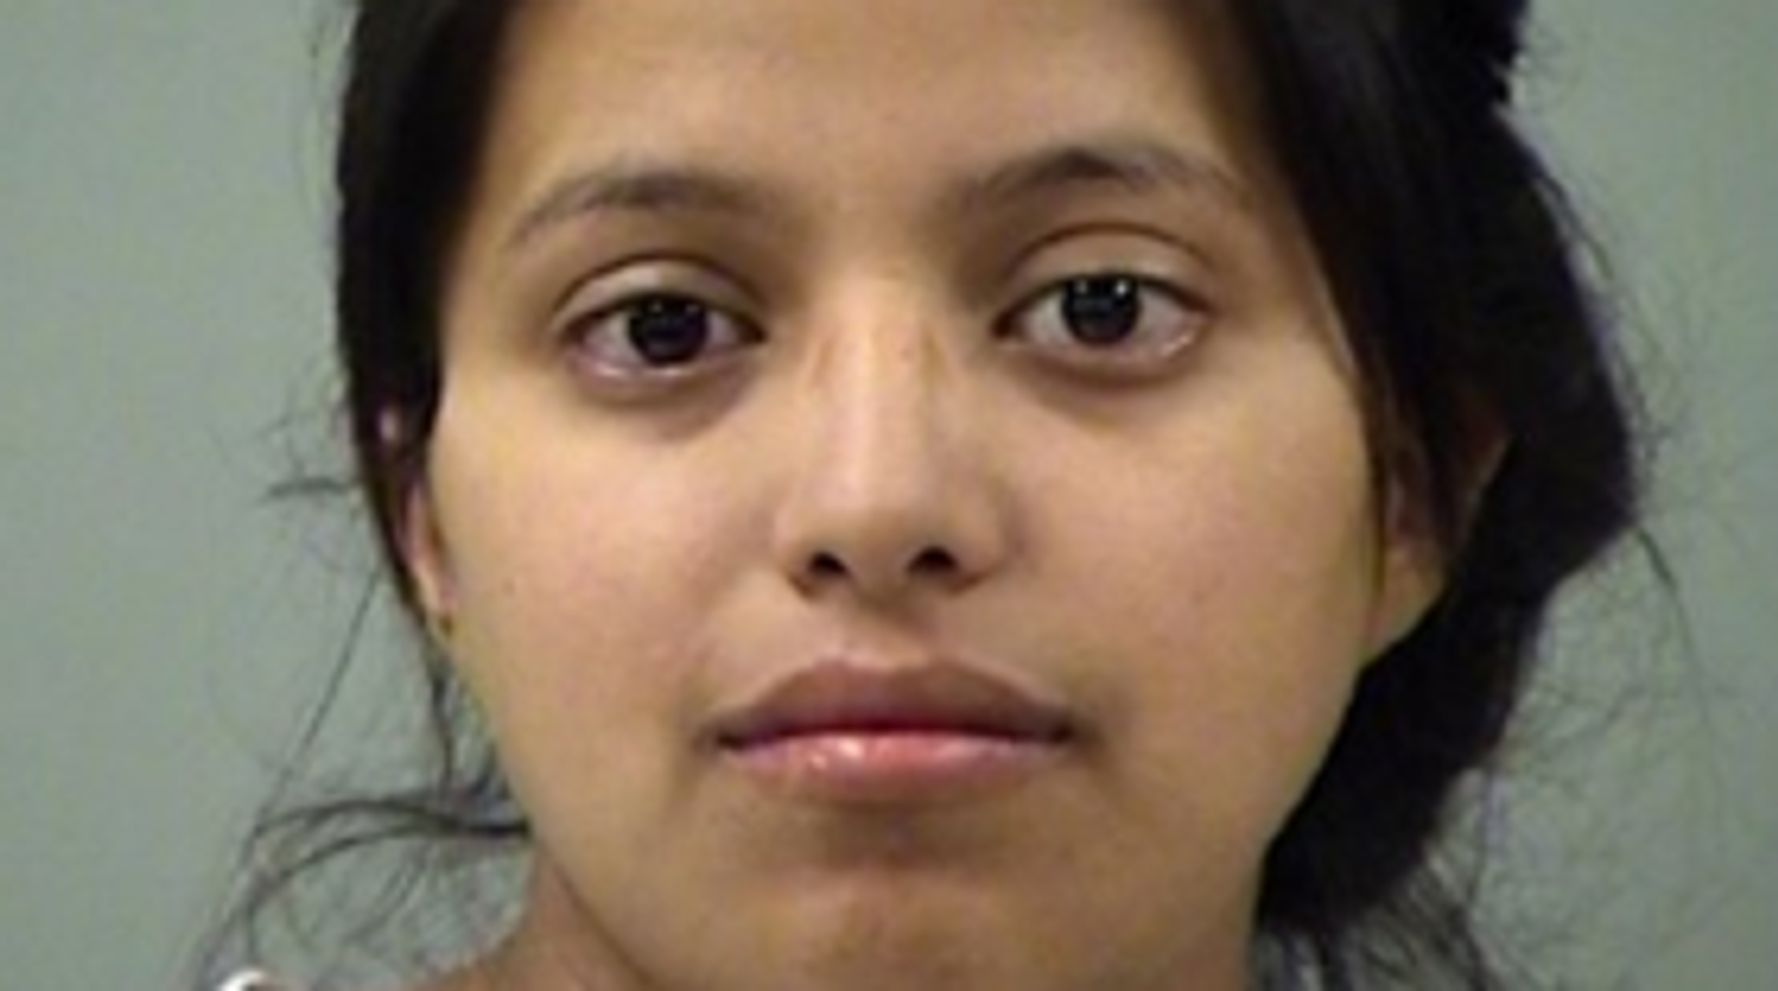 Texas Babysitter Coerced 4-Year-Old Boy To Perform Sex Acts ...